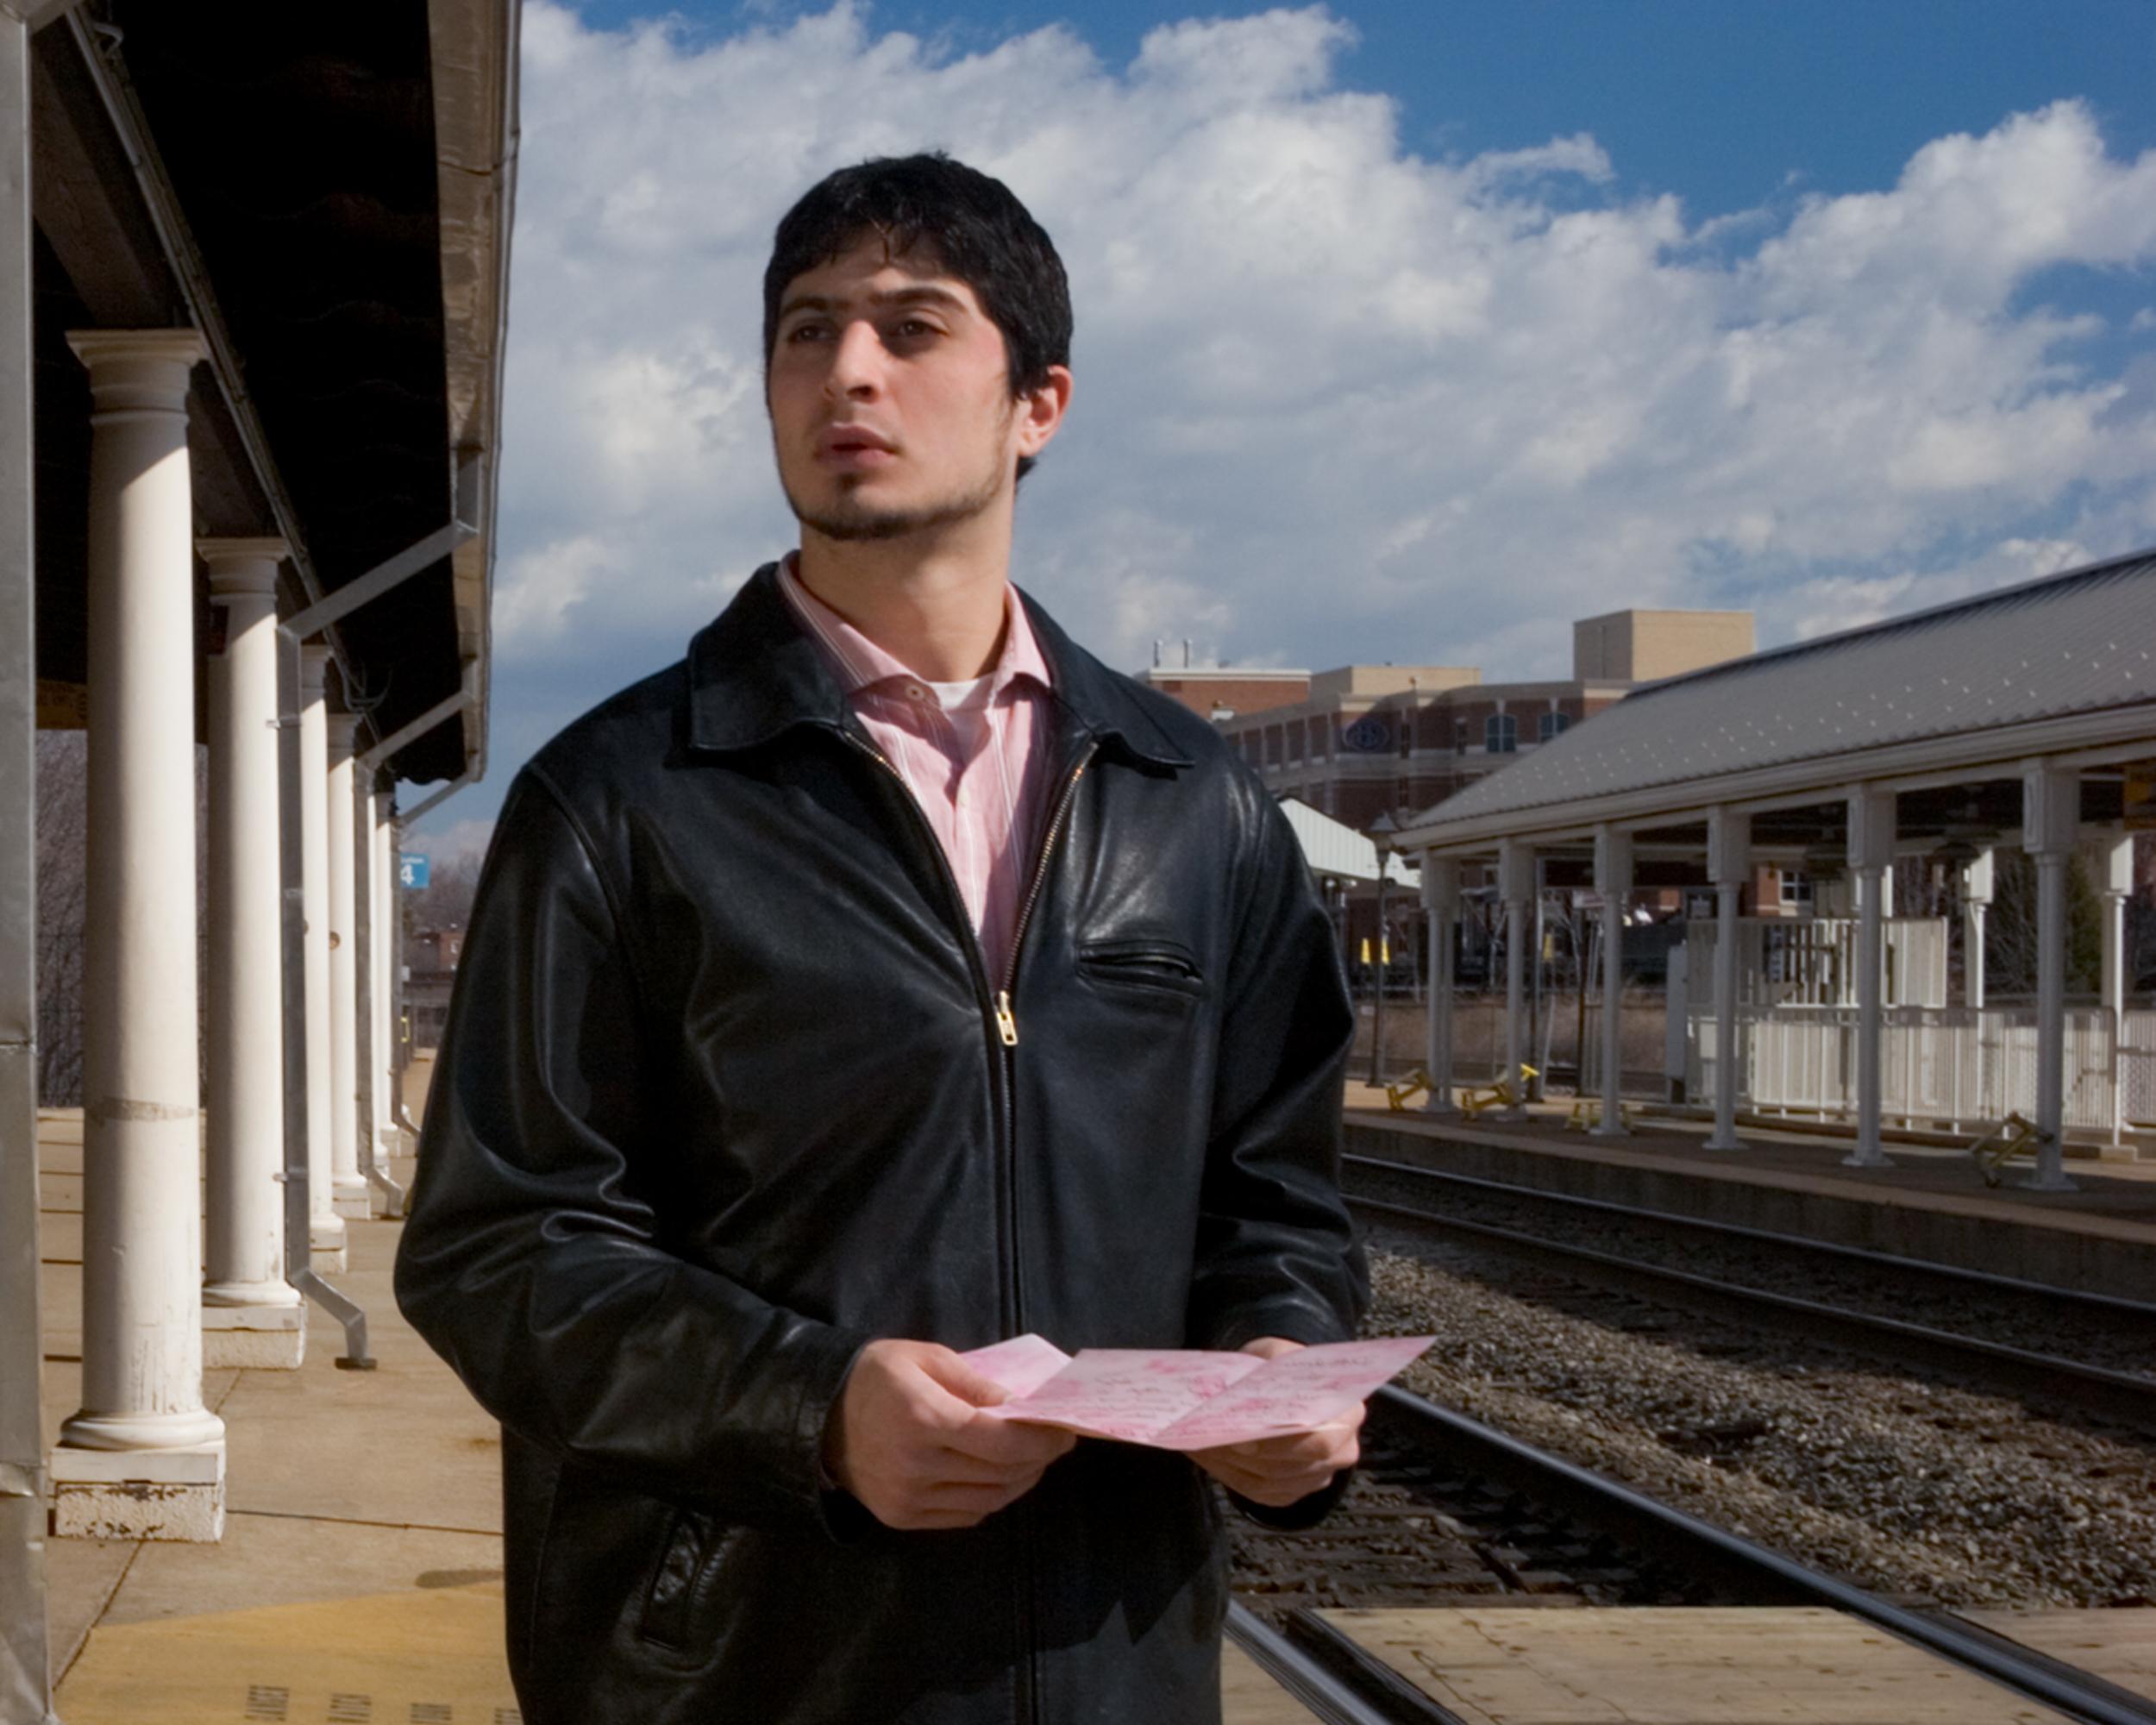 “Easy on the Eyes: Mrs. DeWinter” Portrait of a Beautiful Man at a Train Station - Contemporary Photograph by Jeanette May